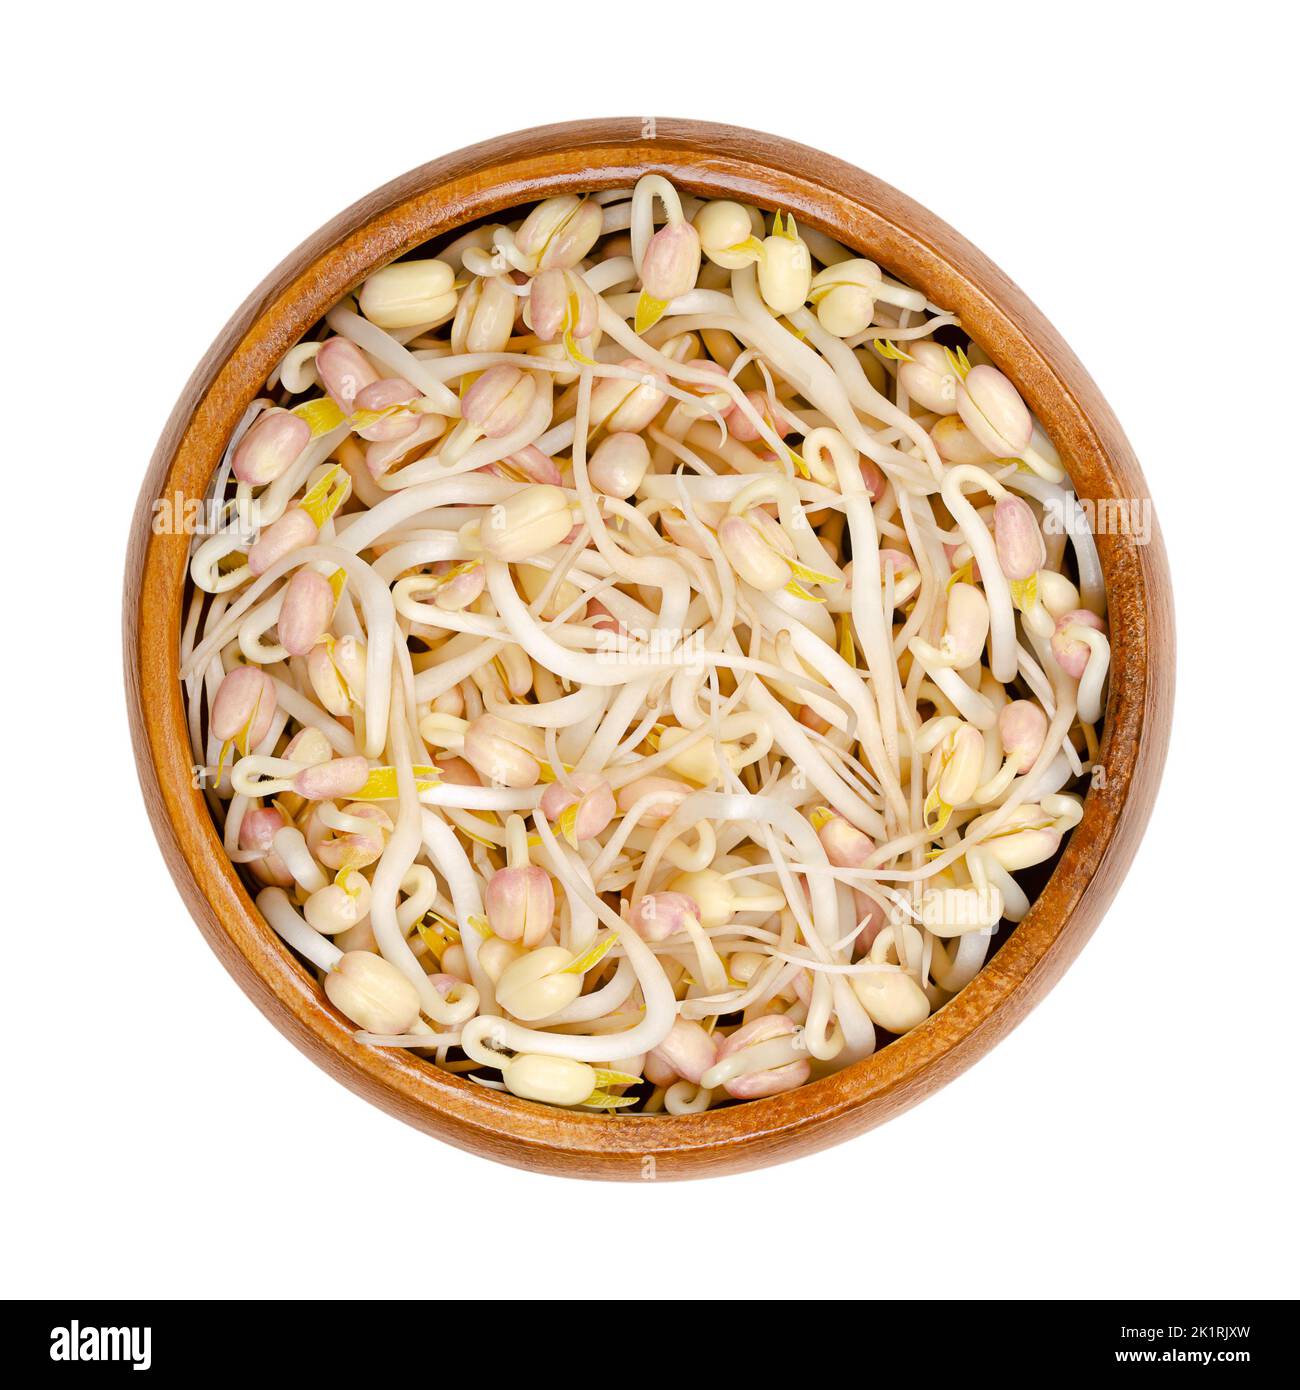 Mung bean sprouts in a wooden bowl. Vegetable, grown by sprouting mung beans, Vigna radiata, also known as green gram, maash, monggo or munggo. Stock Photo